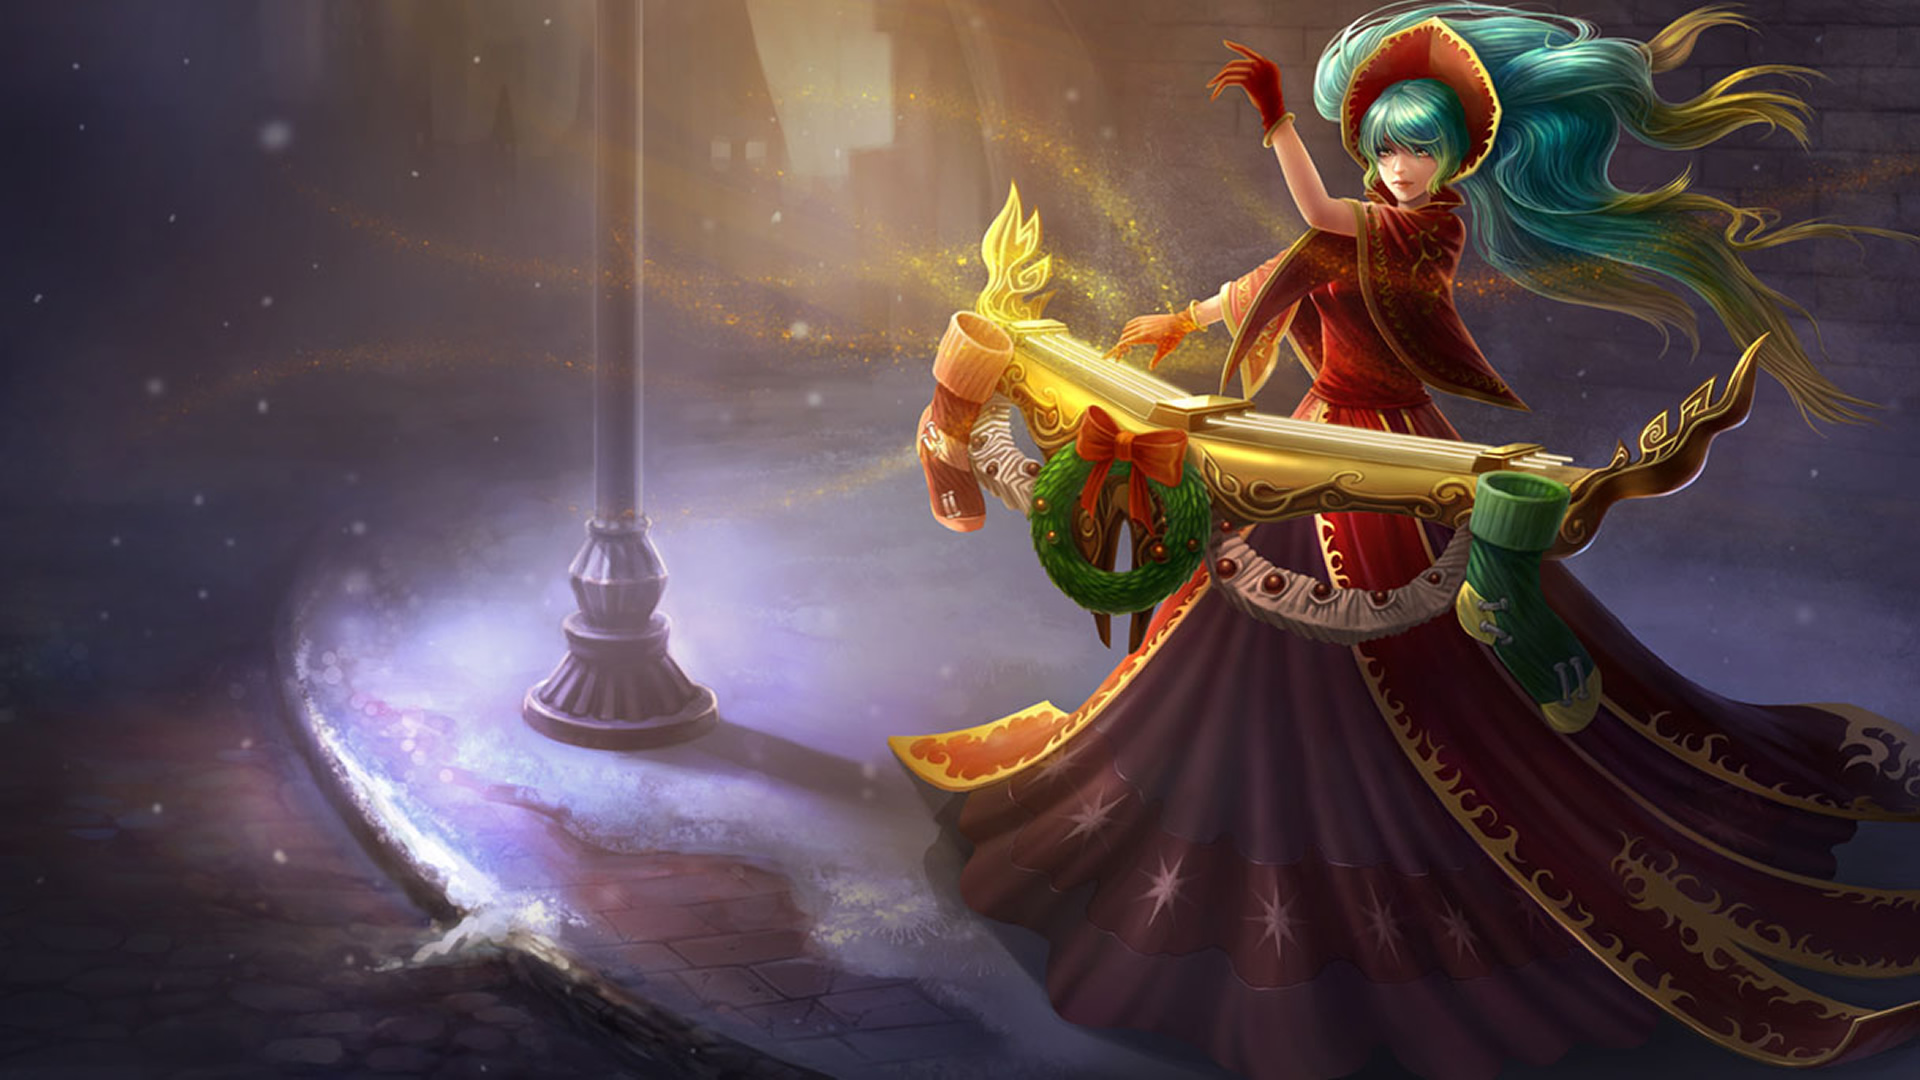 Silent Night Sona (Chinese) - League of Legends Wallpapers